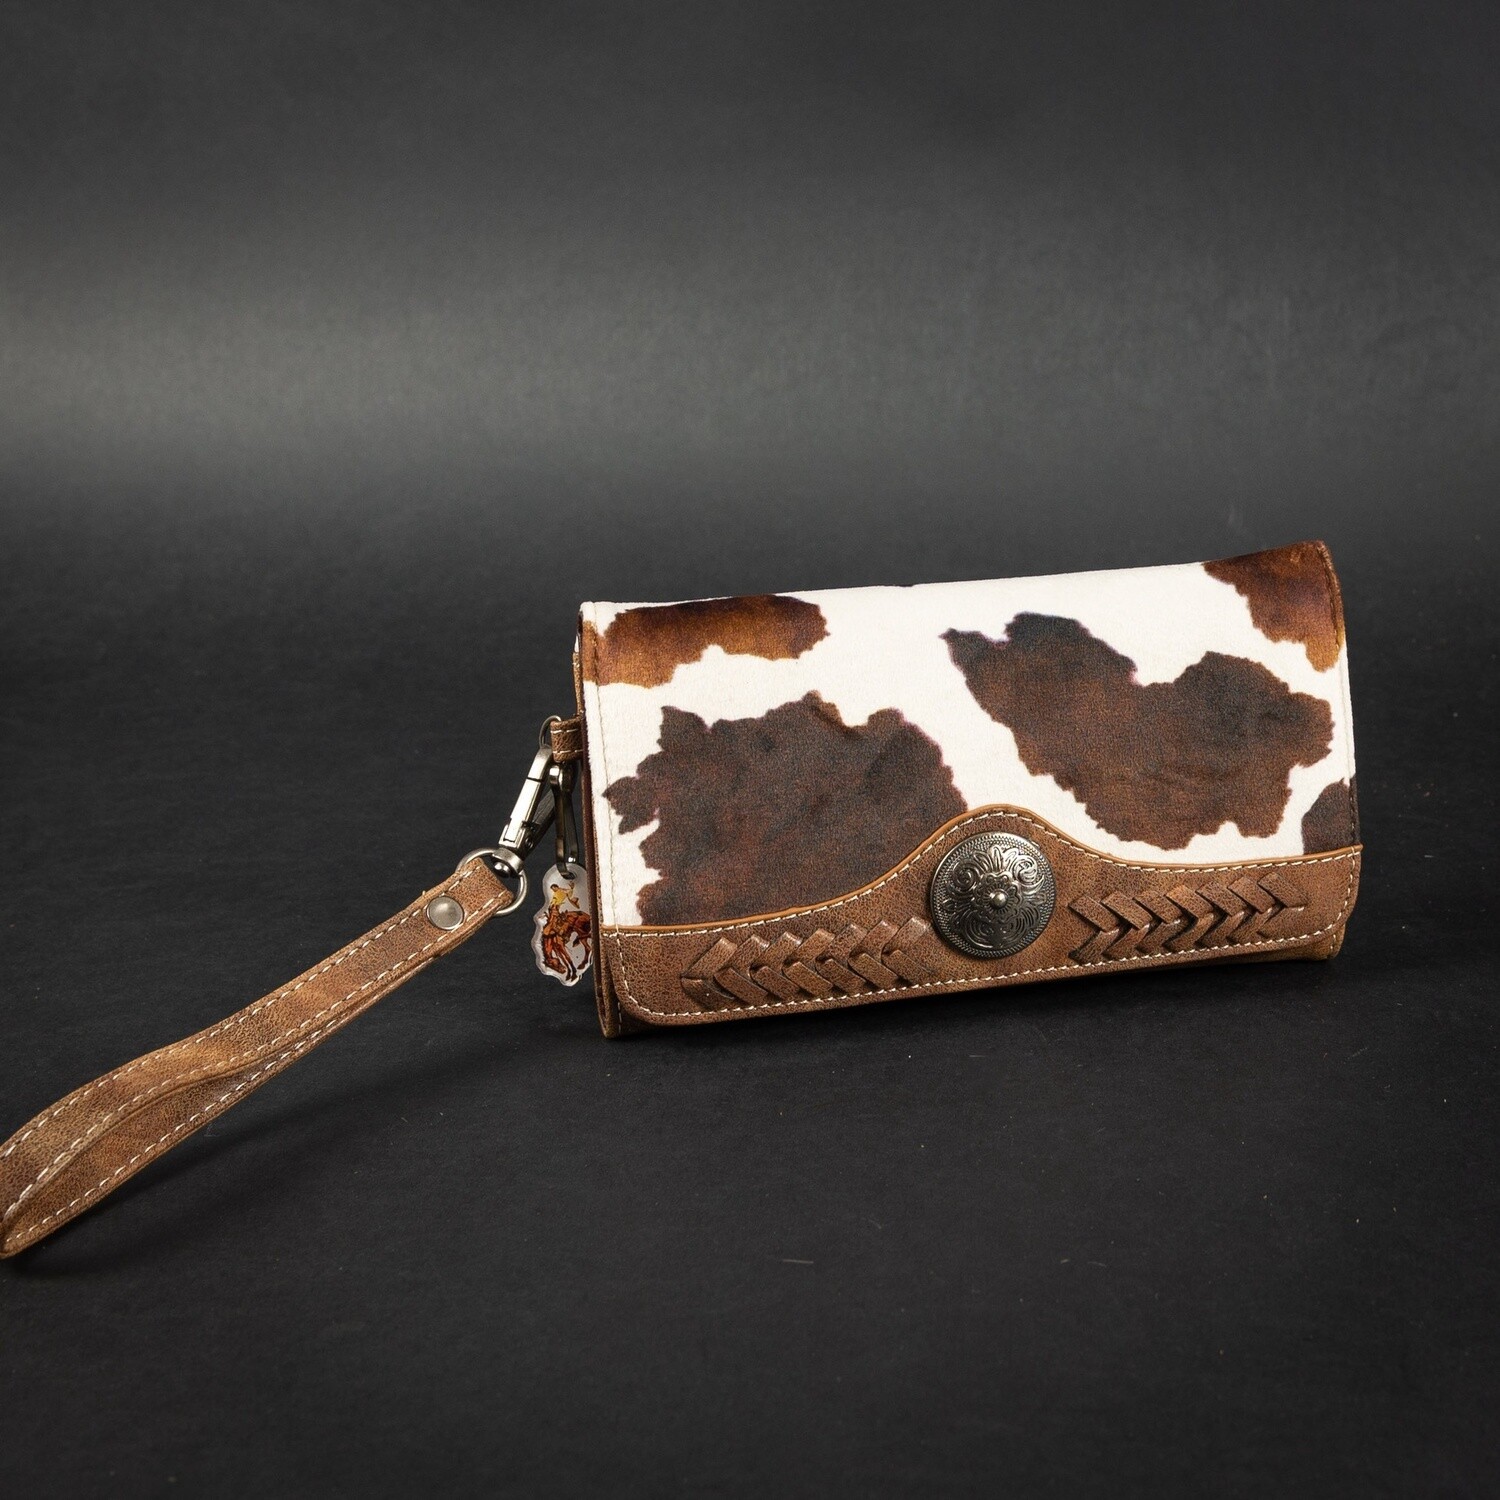 Pendleton Round-Up Suede Cow Print Wallet